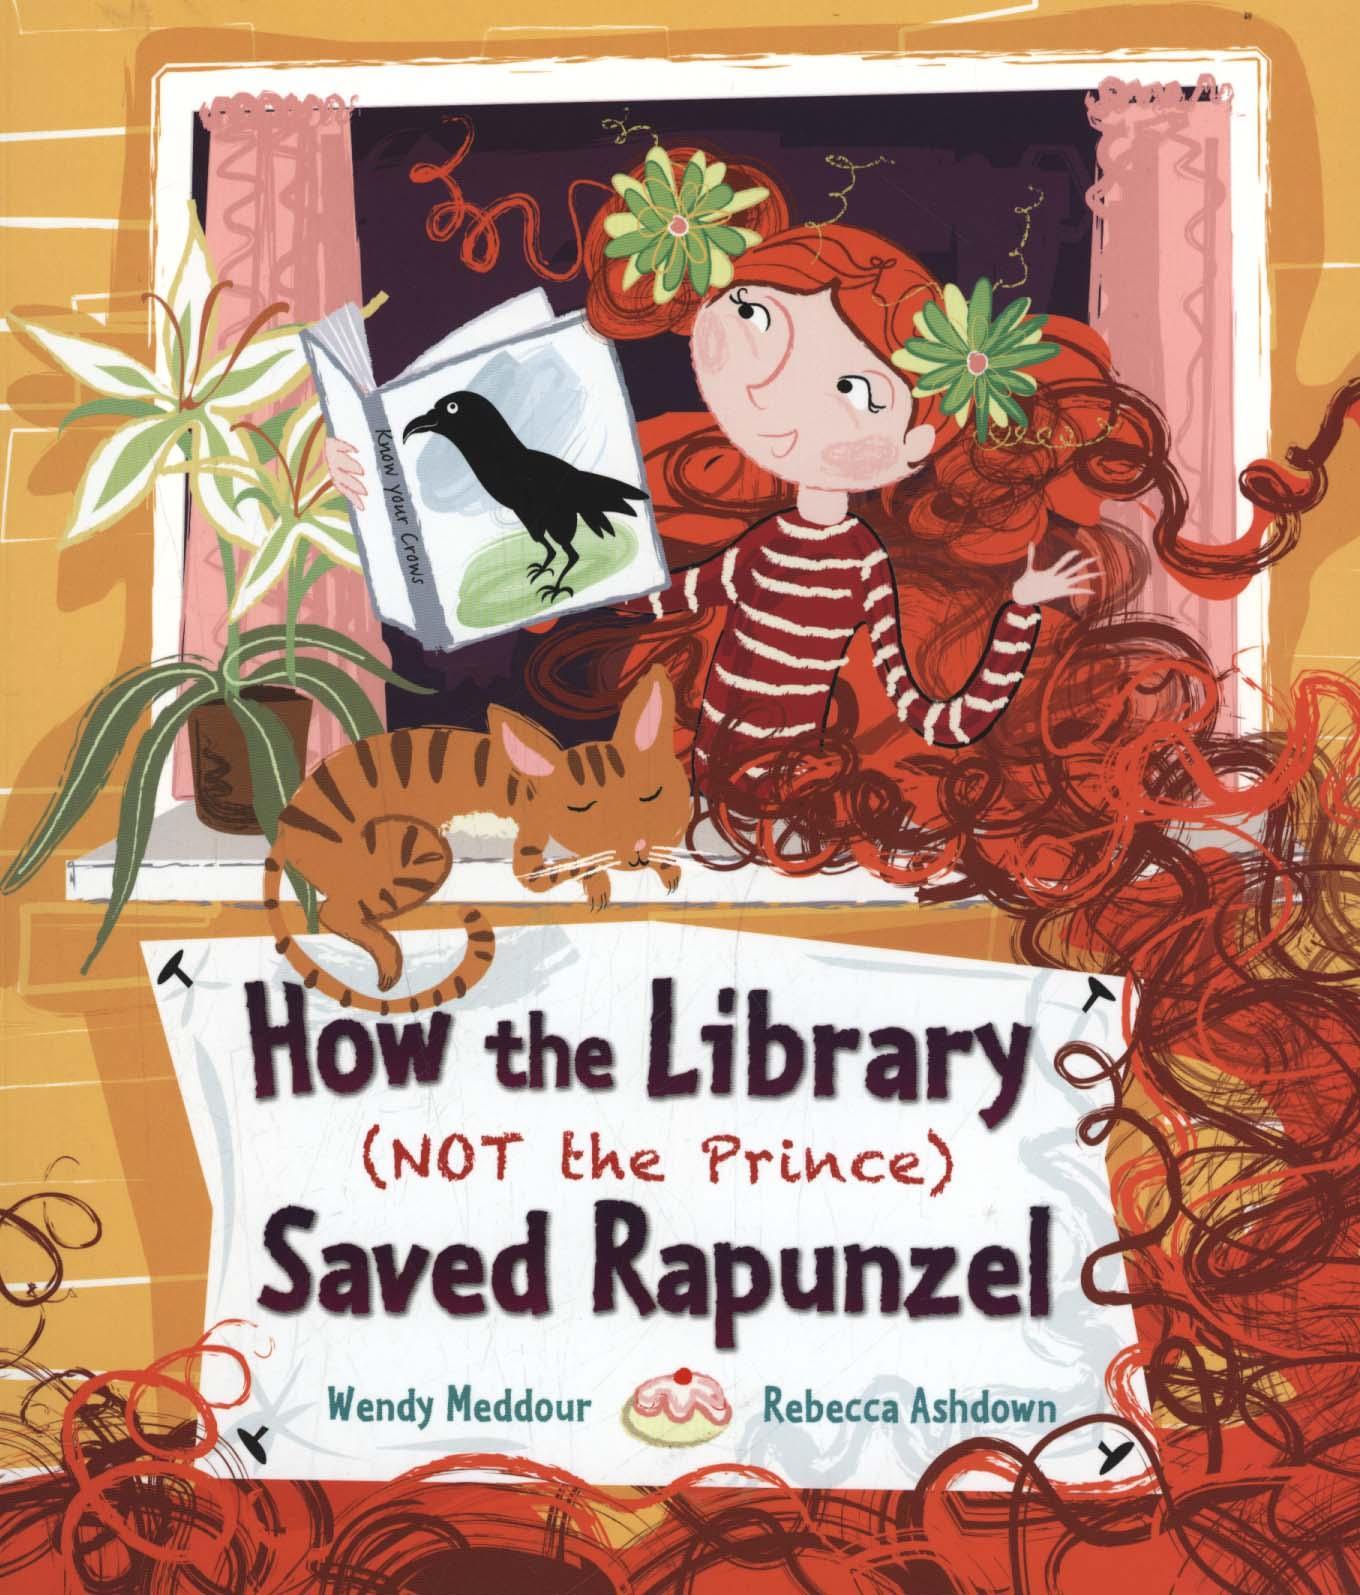 How the Library (Not the Prince) Saved Rapunzel